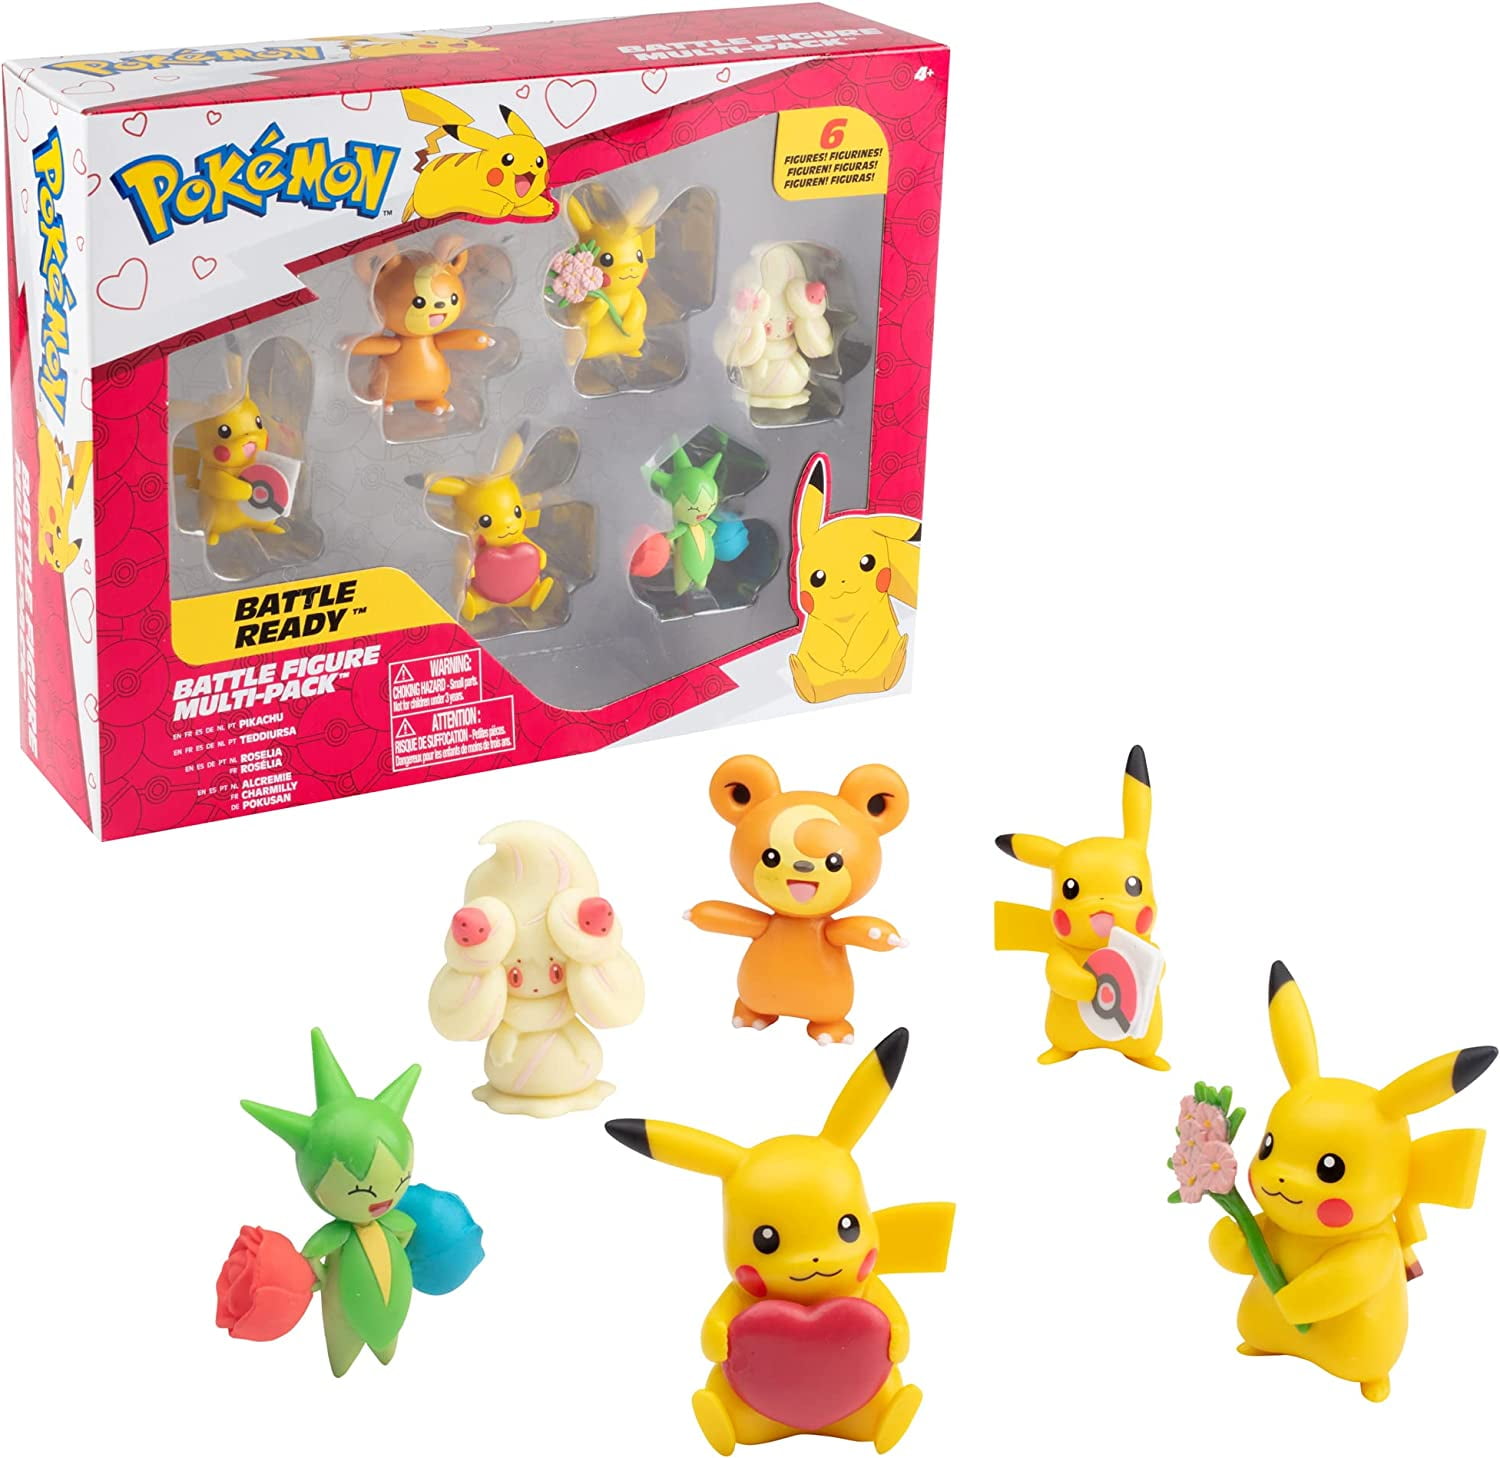 Pokemon Battle Figure Pack Toy Gift & - Love - for - Teddiursa, Kids Licensed Pieces 6 Alcremie Officially Edition 3 Pikachu, Collectible Roselia Set, 